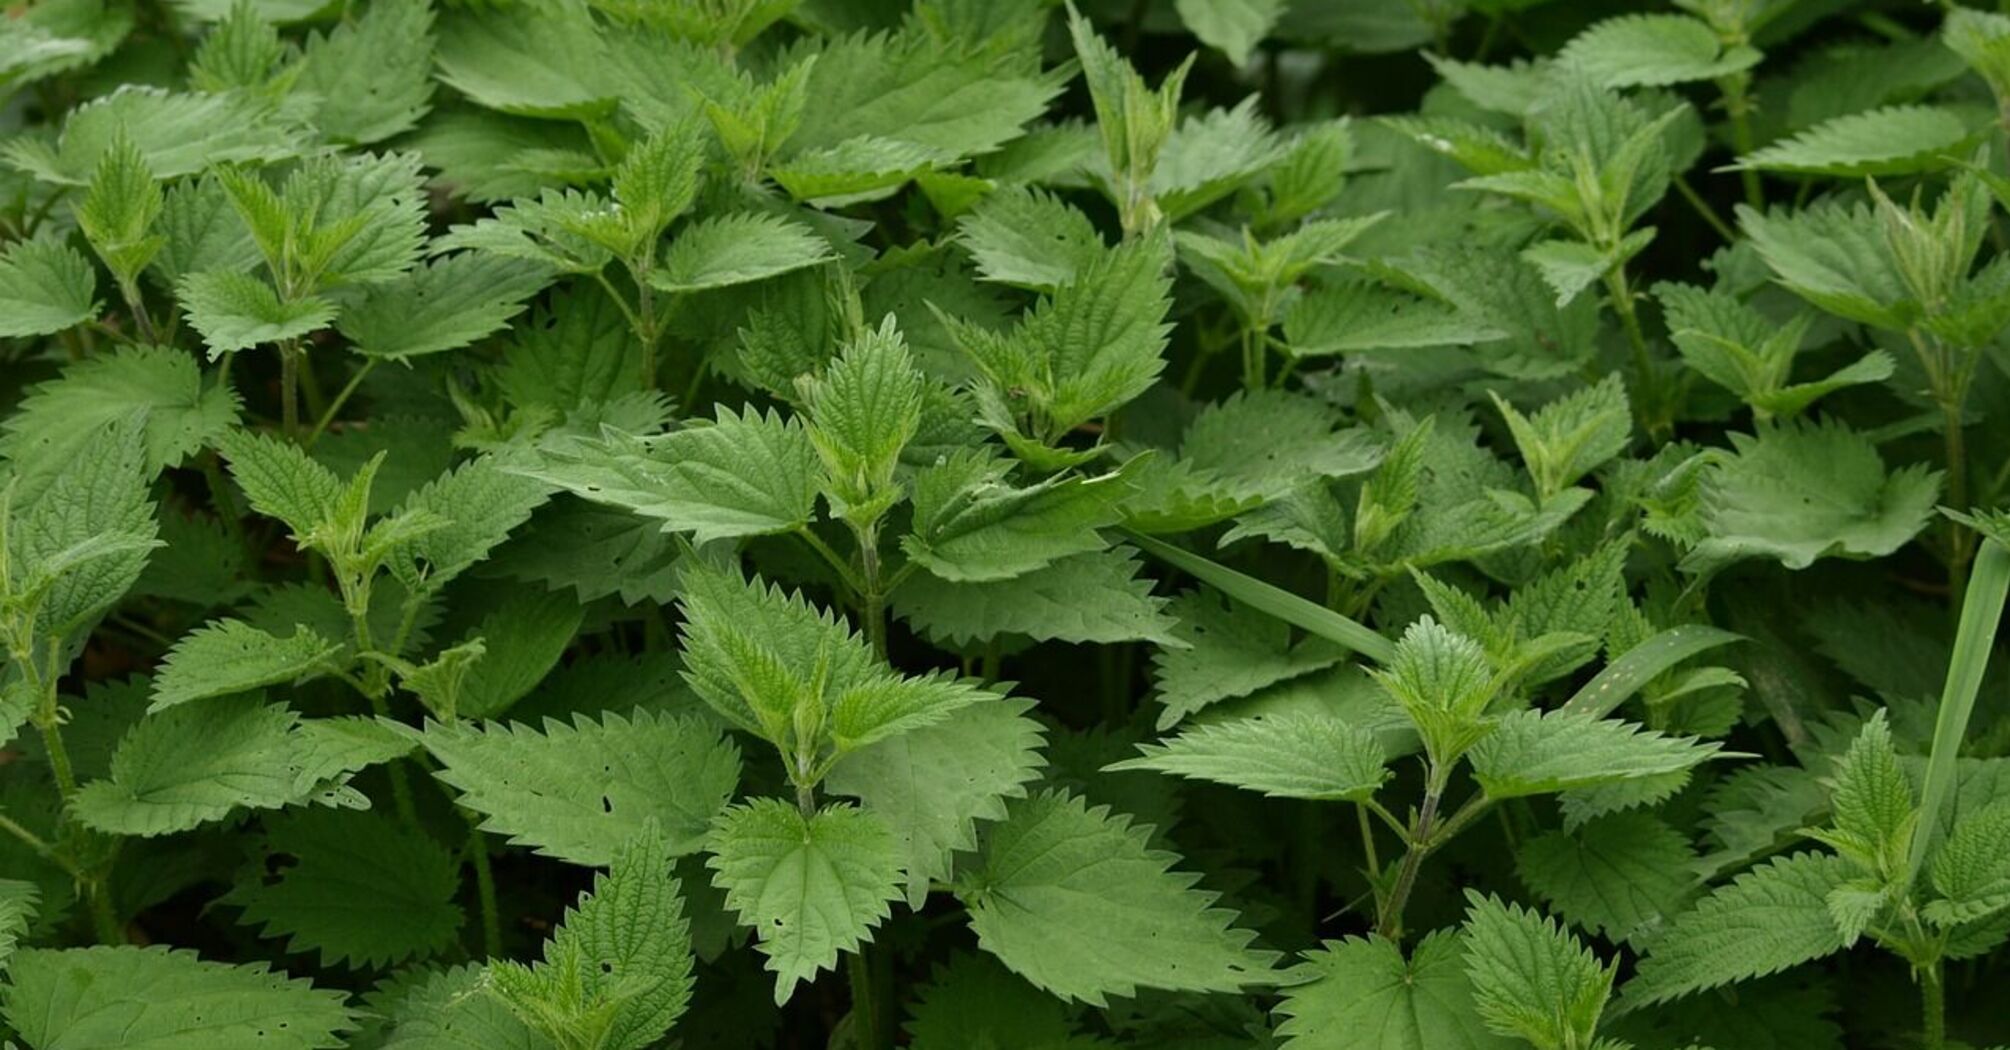 How to get rid of nettles in the garden: the most effective ways